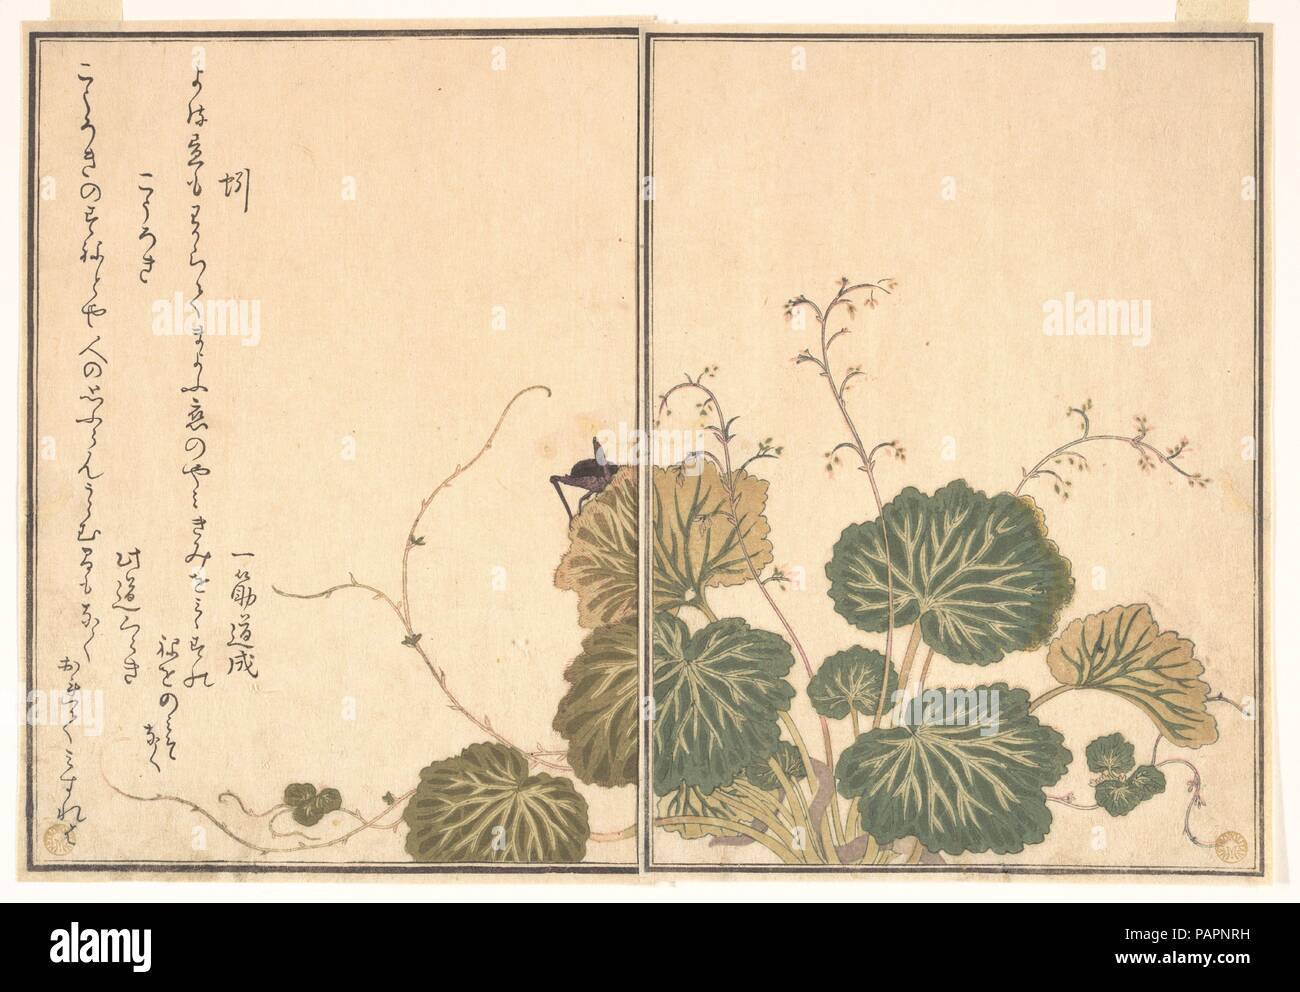 Earthworm (Mimizu); Cricket (Korogi), from the Picture Book of Crawling Creatures (Ehon mushi erami). Artist: Kitagawa Utamaro (Japanese, ca. 1754-1806). Culture: Japan. Dimensions: 10 1/2 x 7 7/32 in. (26.7 x 18.4 cm). Date: 1788.  Ehon mushi erami (Picture Book of Crawling Creatures) is illustrated with fifteen designs of insects and other garden creatures by Utamaro. Published by Tsutaya Juzaburo , the poems were selected and introduced by a preface written by the poet and scholar Yadoya no Meshimori (Rokujuen; 1753-1830), who later became head of the influential Go-gawa poetry group. Sever Stock Photo